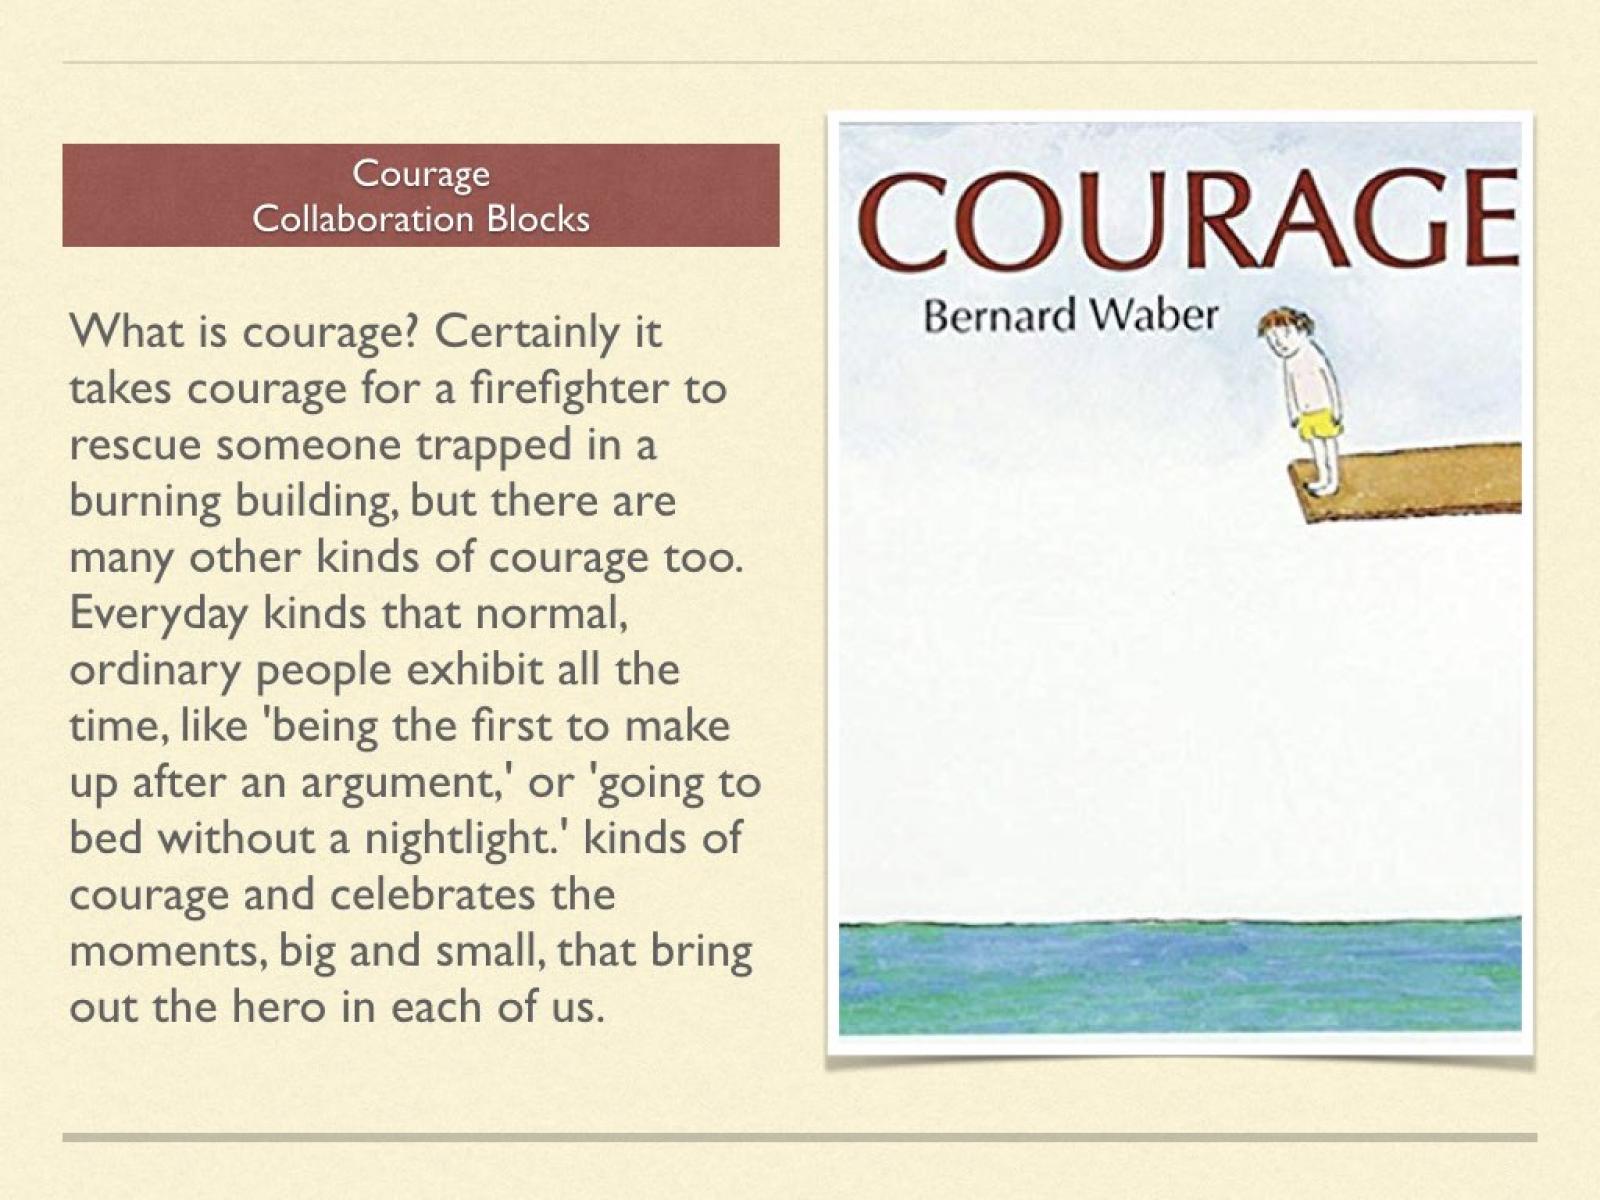 Circle of Courage - Explanation and Materials